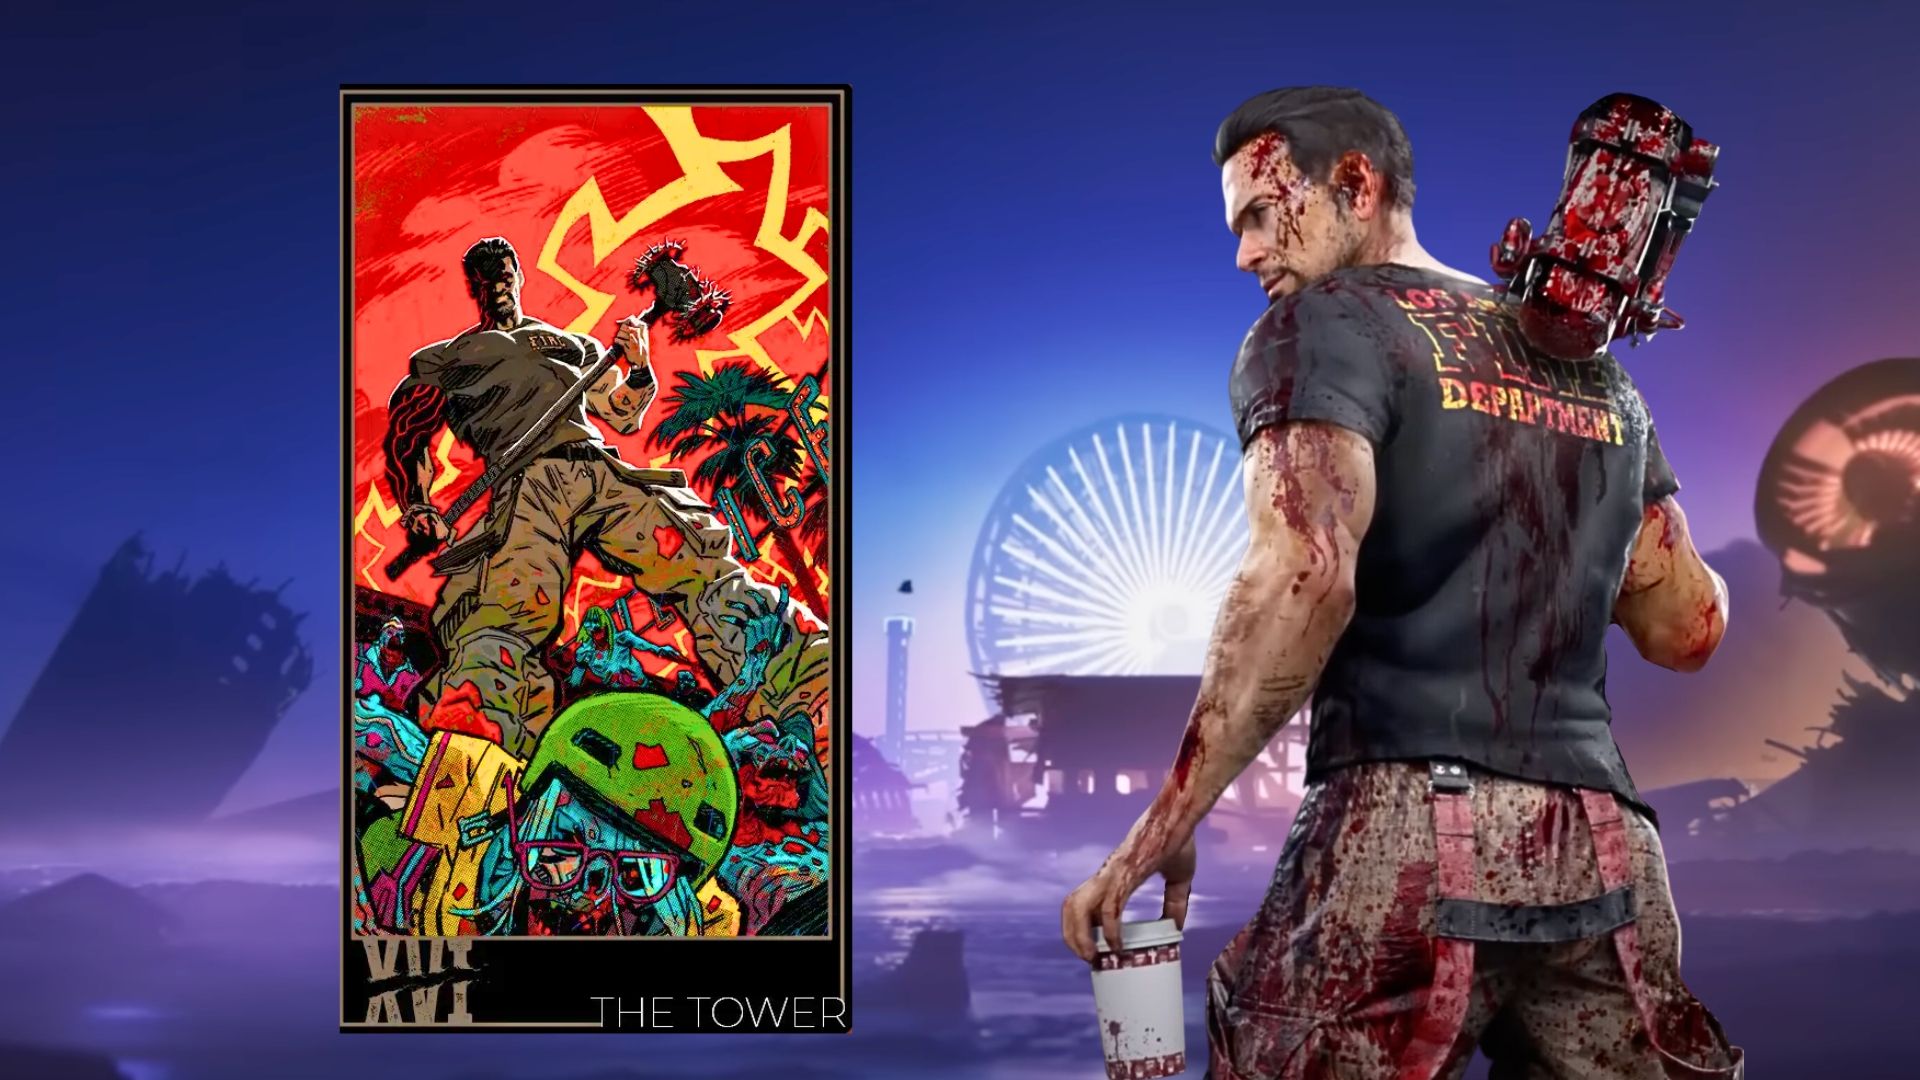 Ryan Character Image and Card from Dead Island 2